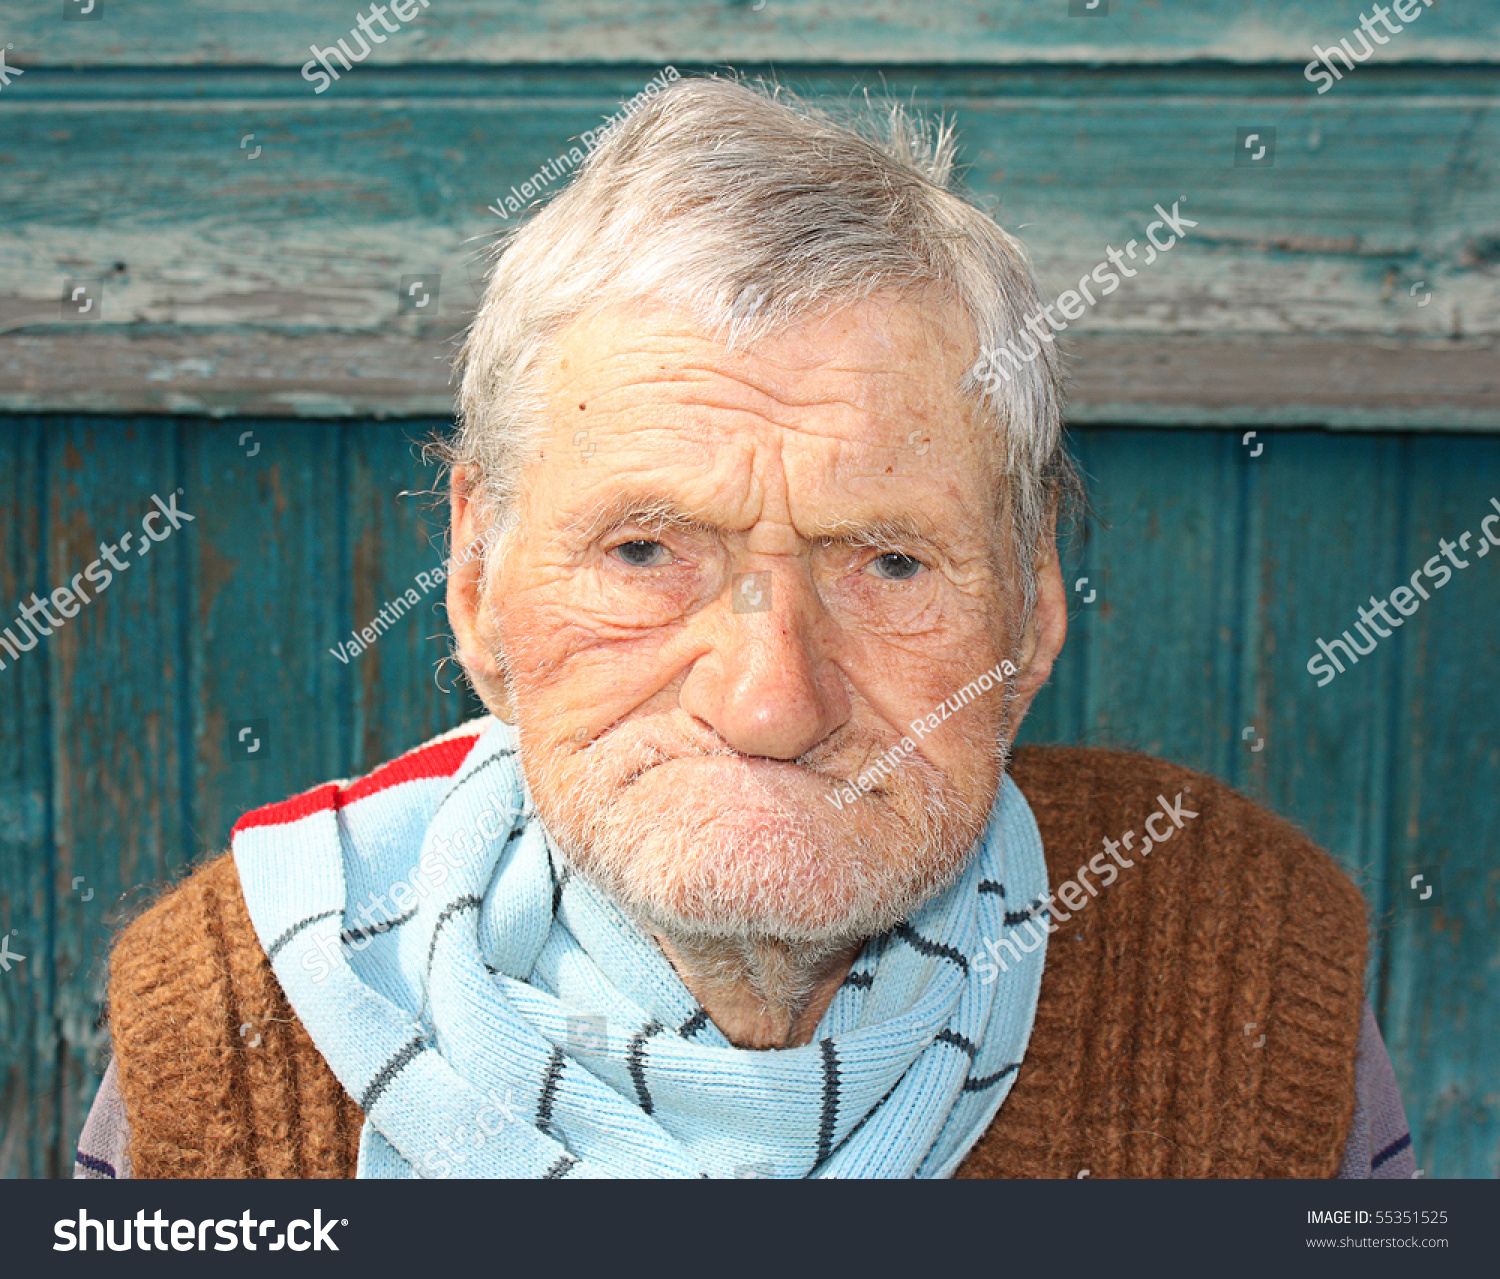 A Portrait Of A Very Old Man, 96 Years Old Near Hi